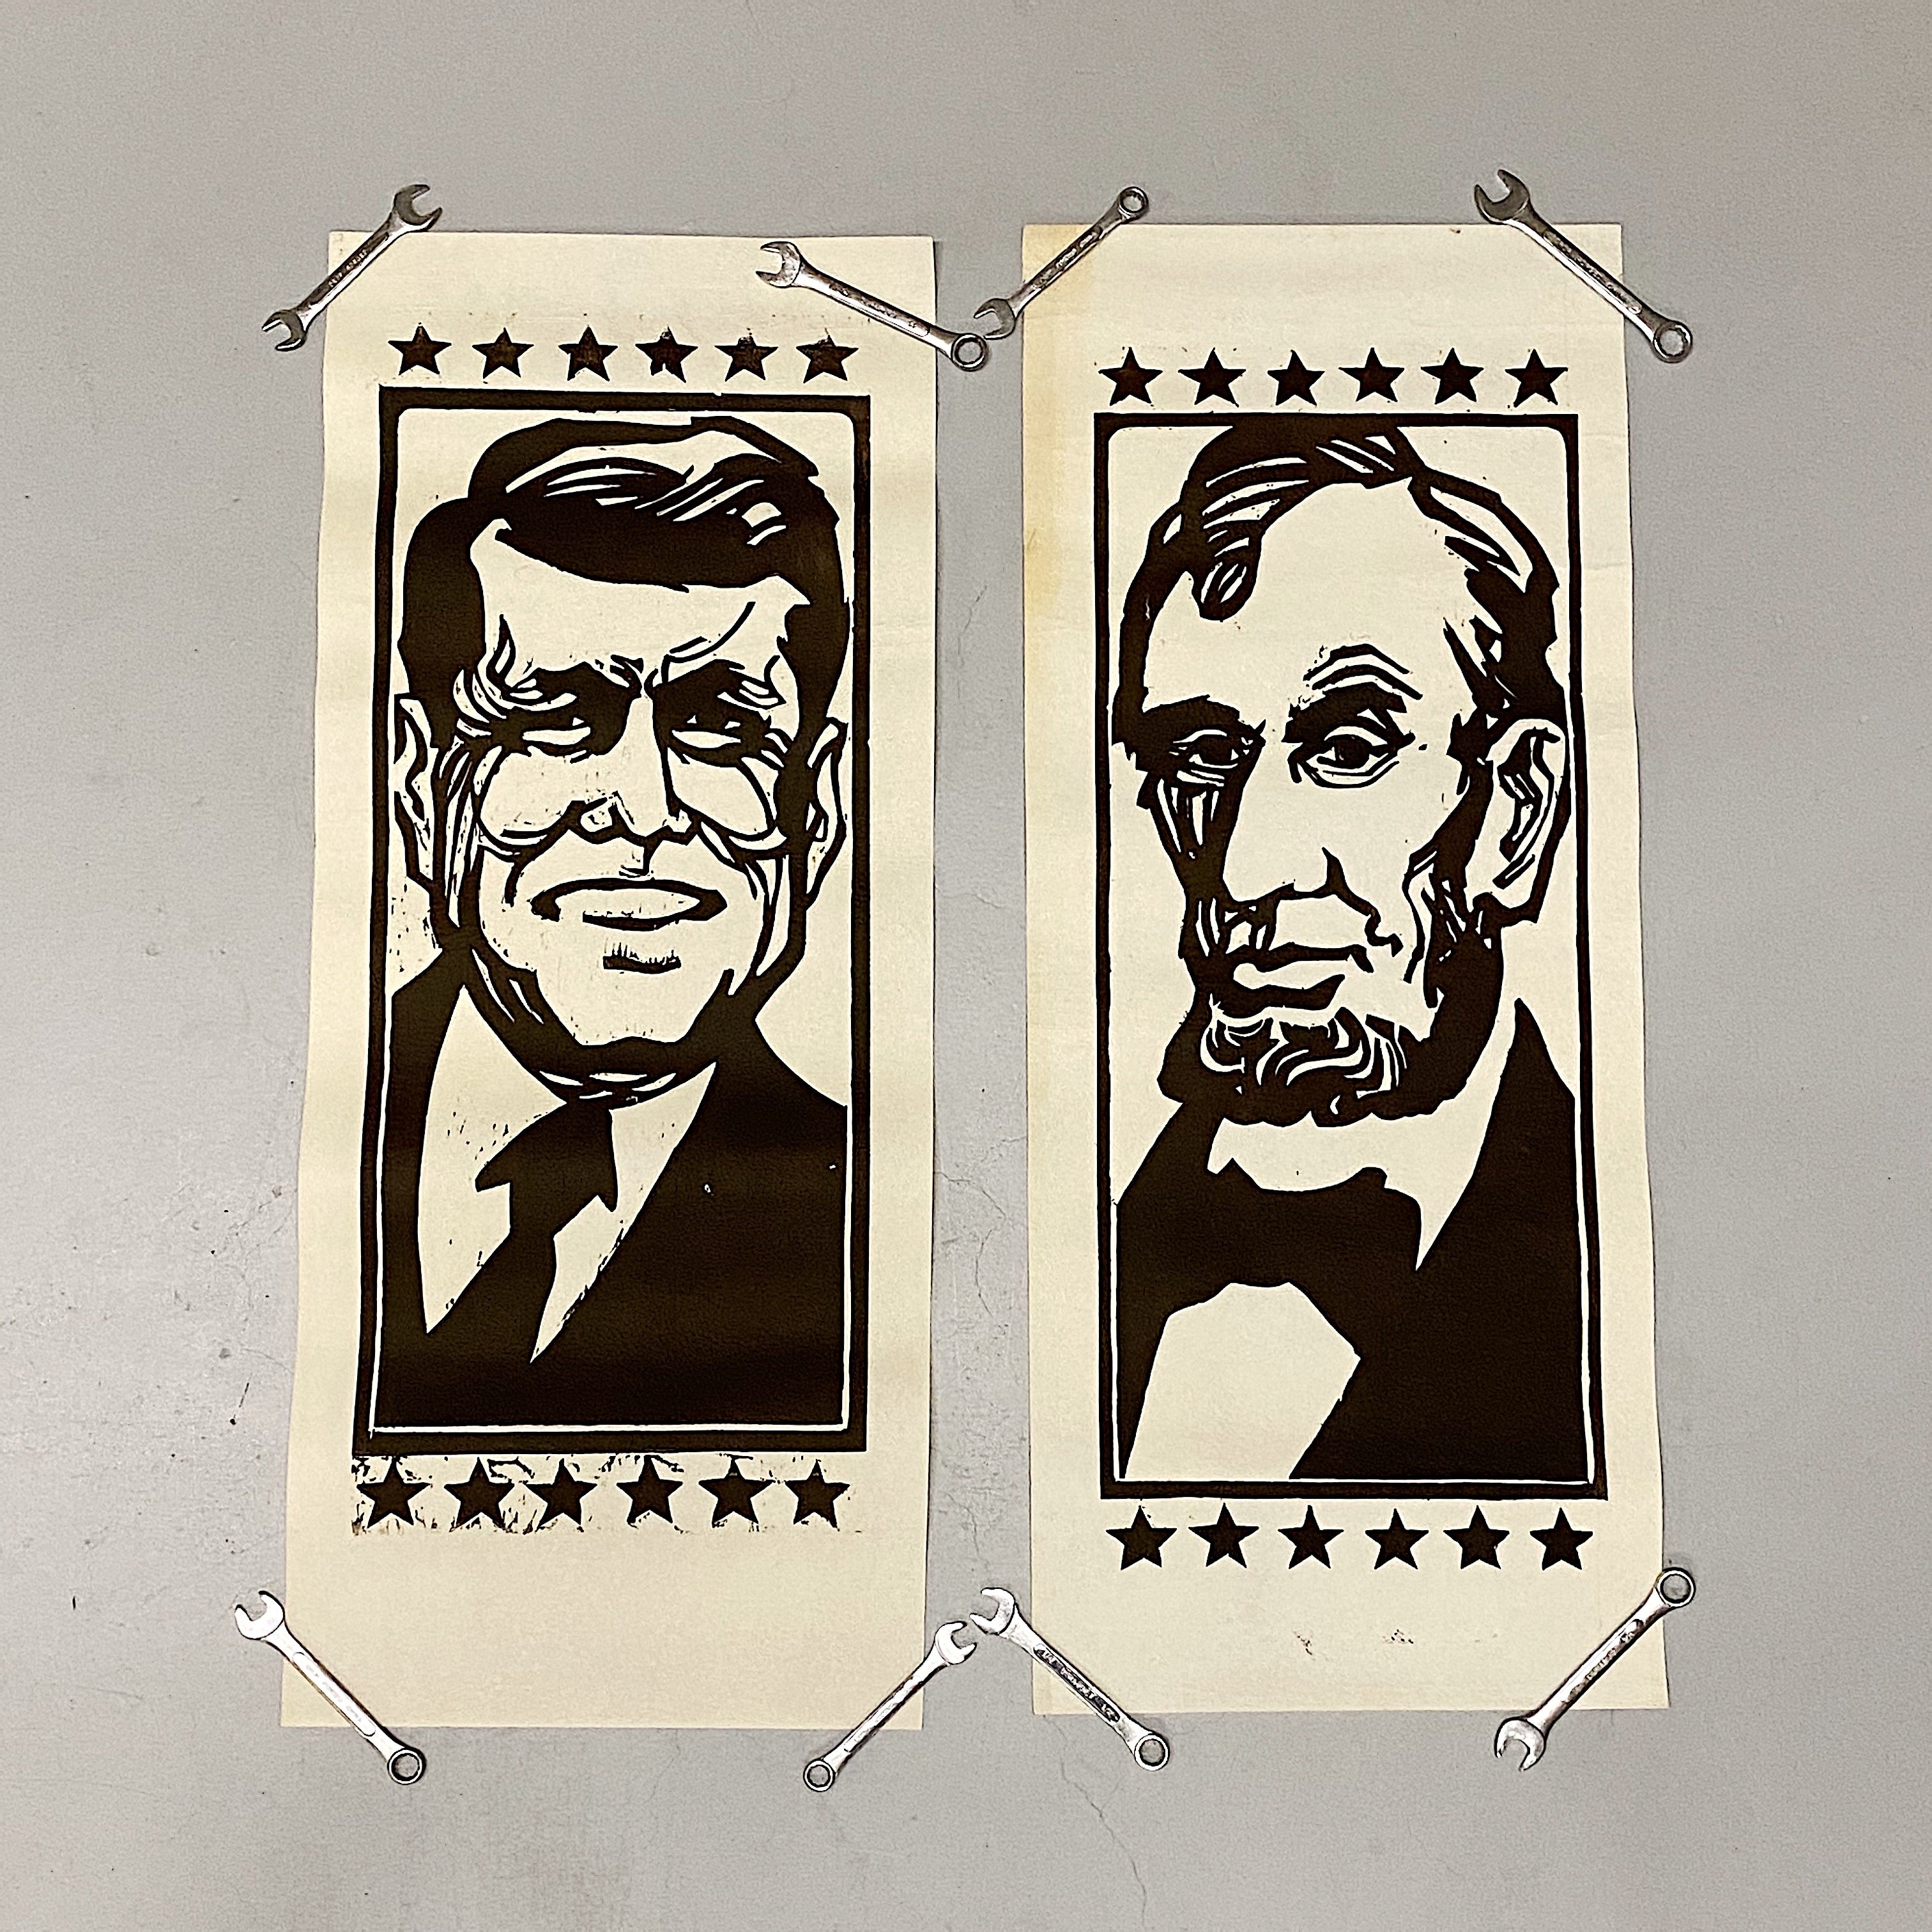 1960s Presidential Woodcut Prints on Thick Paper - Vintage Promotional Wall hangings - JFK - Abraham Lincoln - Ike - Rare Street Art